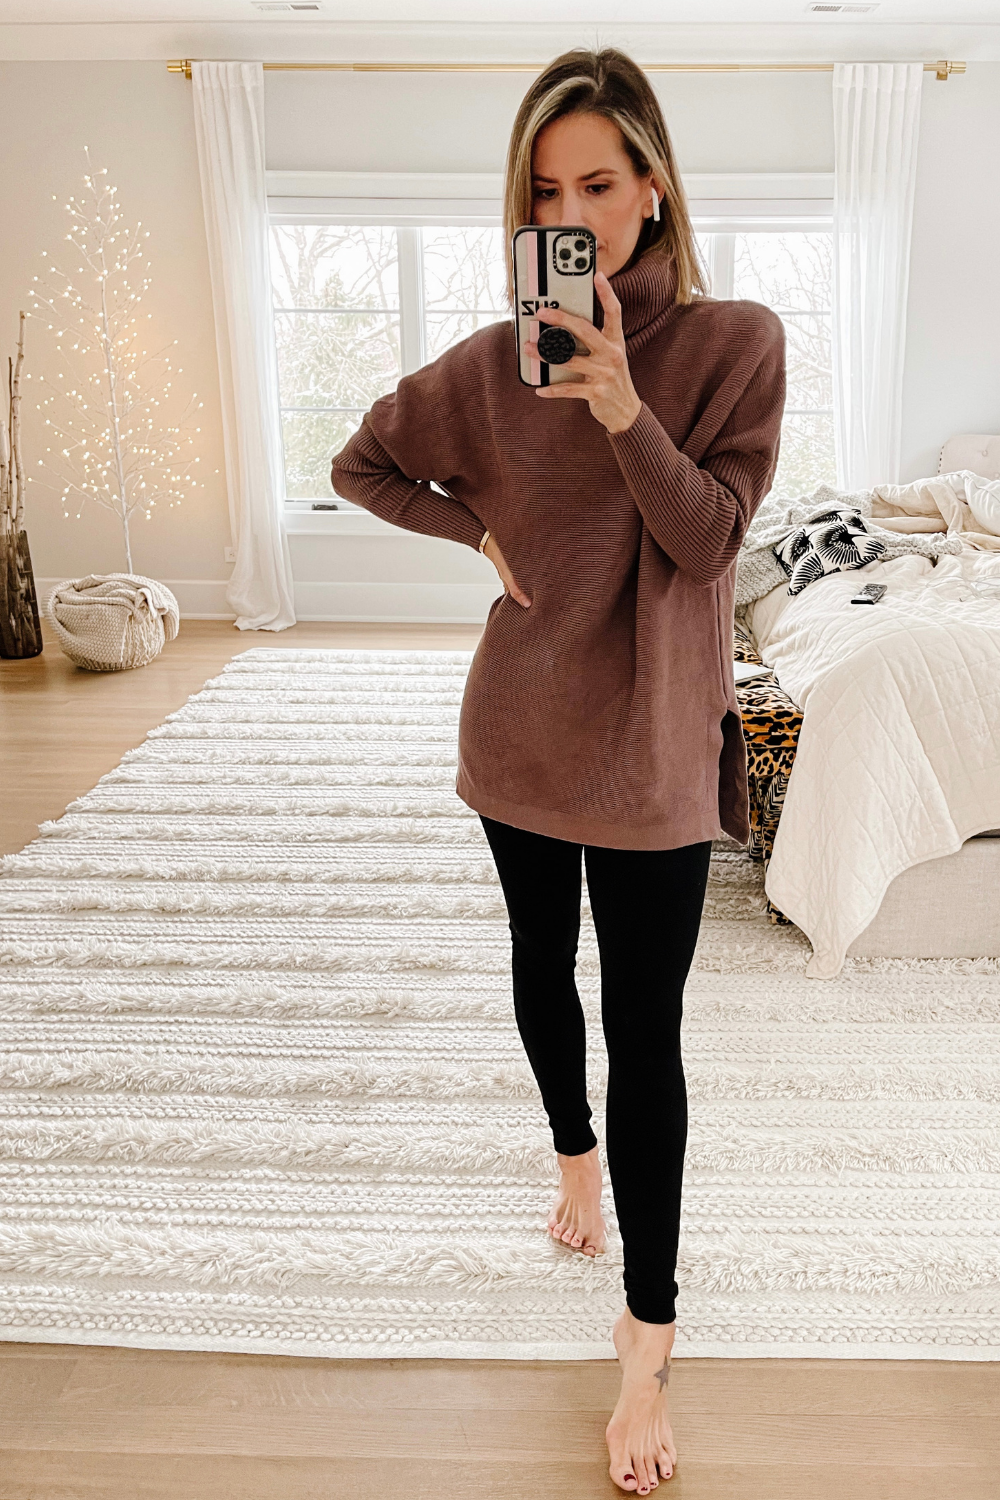 Suzanne wearing a turtleneck tunic and leggings